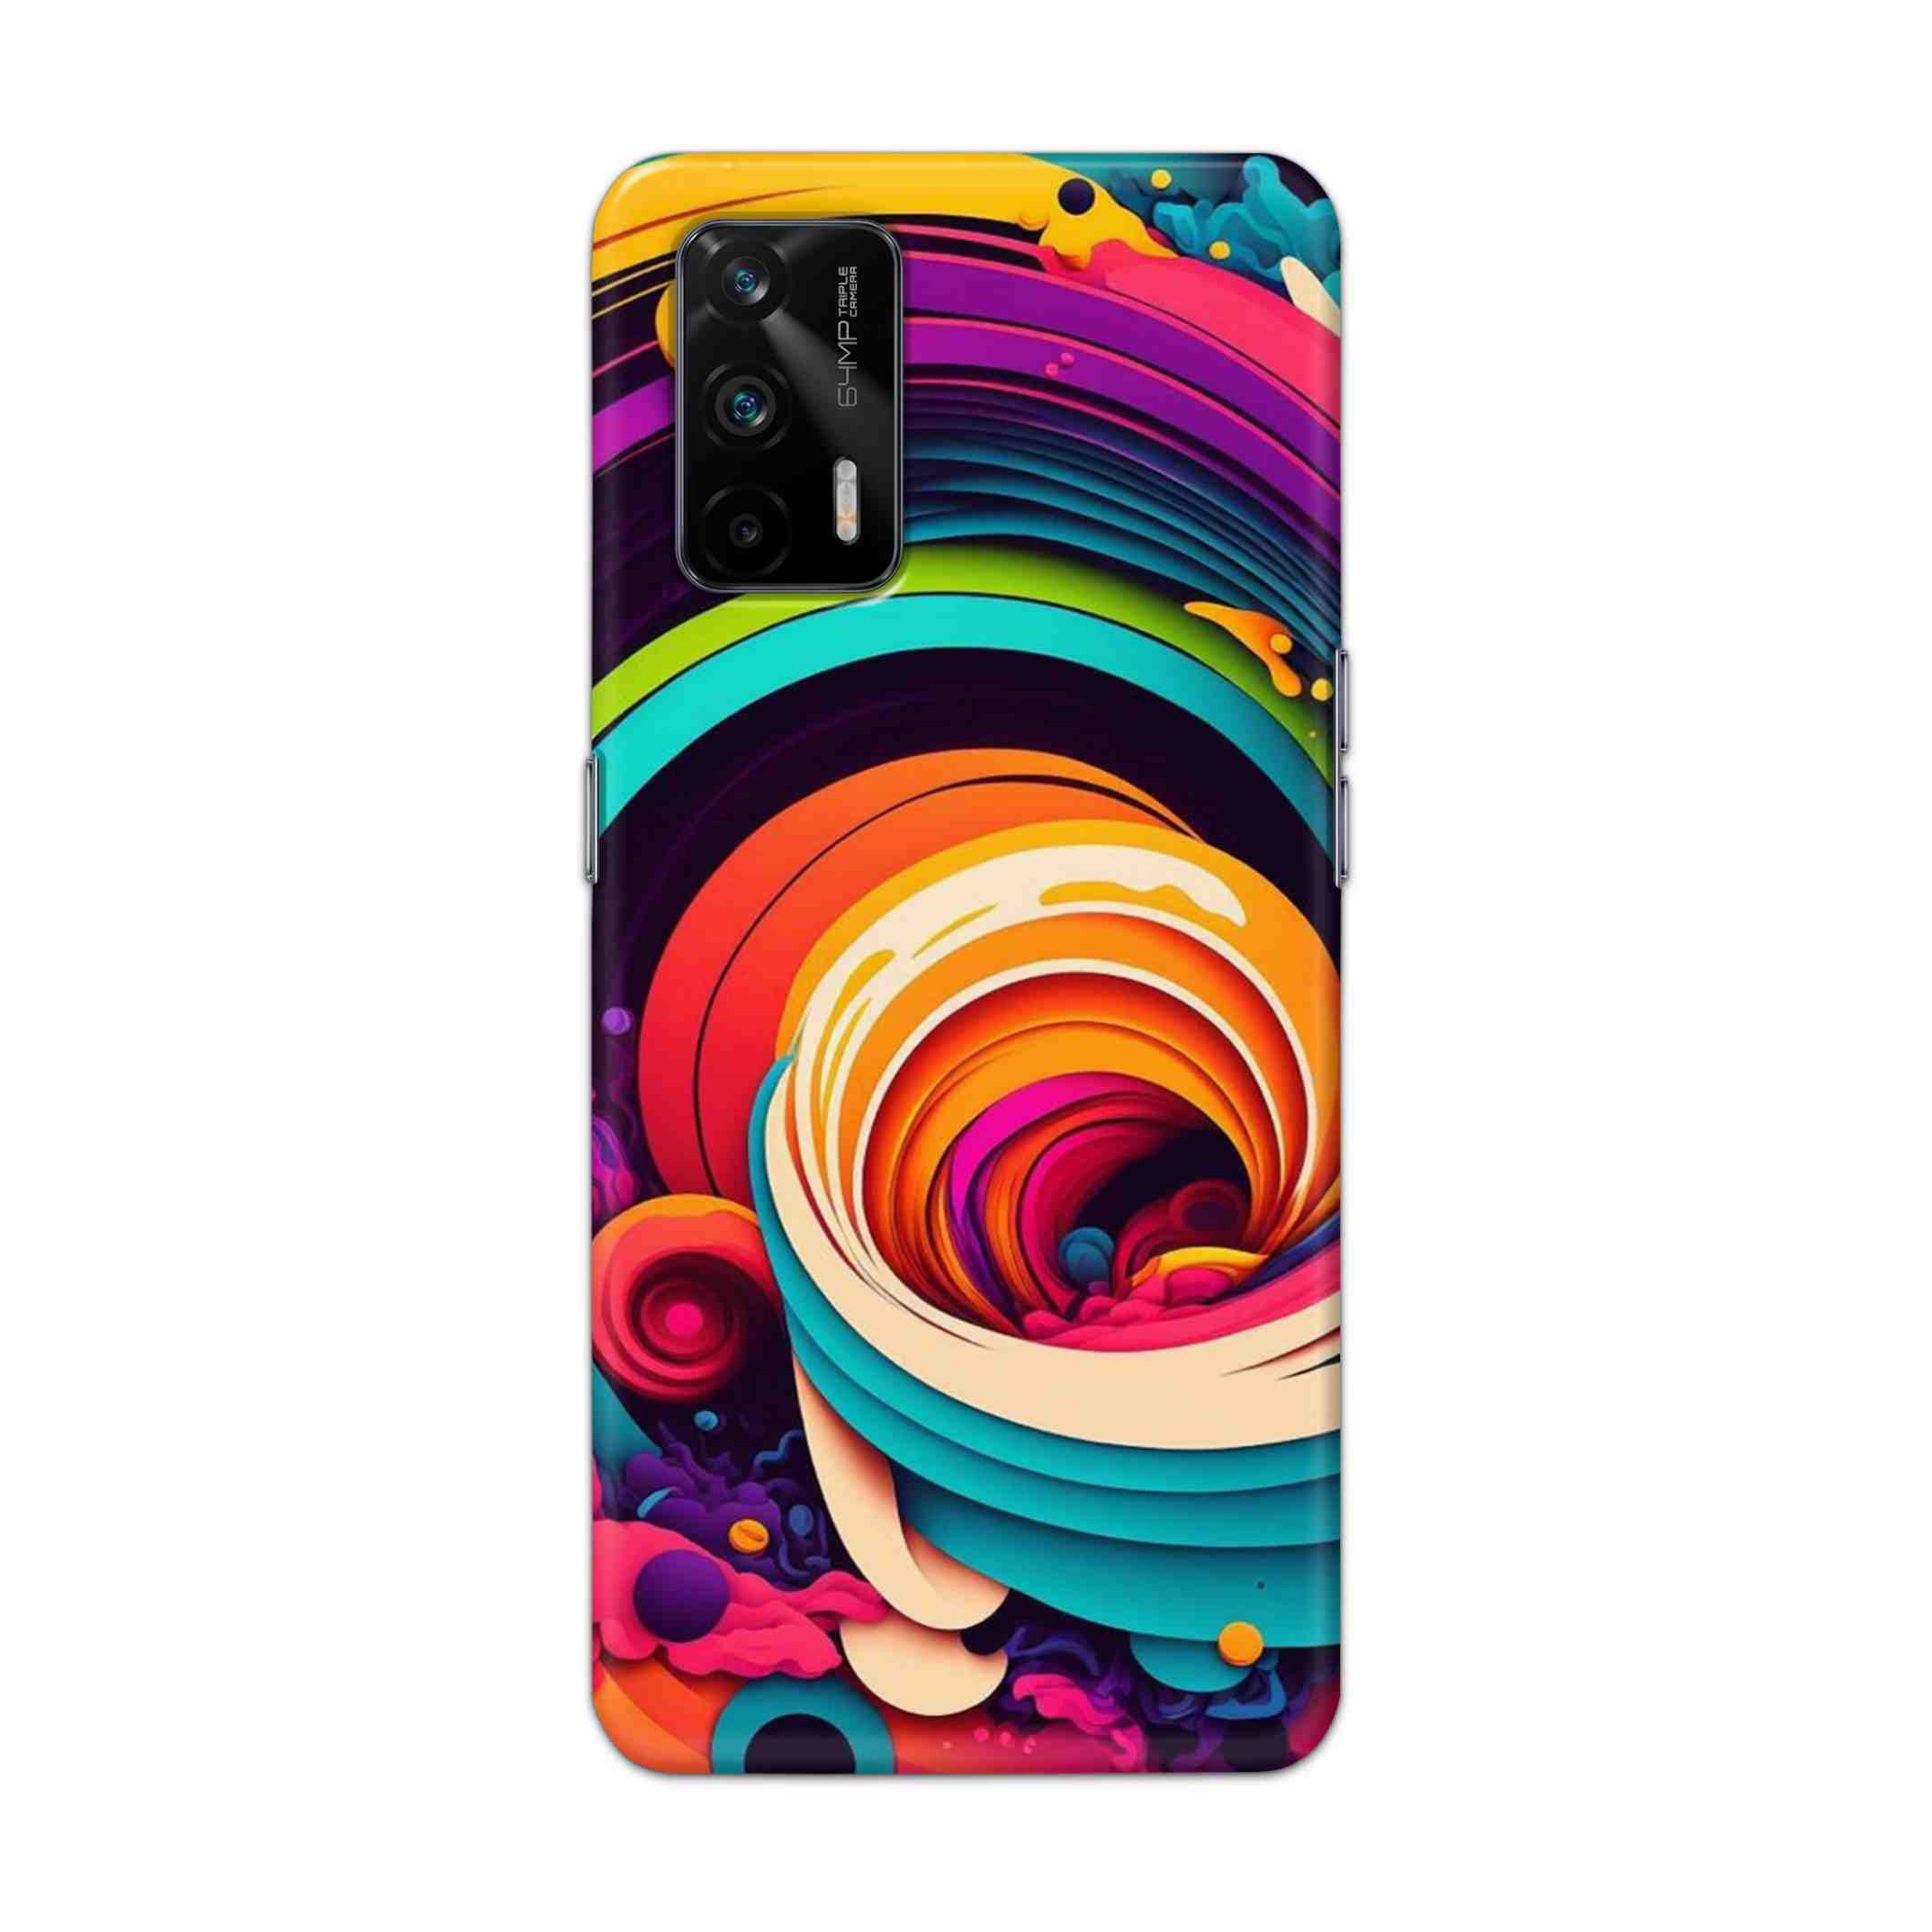 Buy Colour Circle Hard Back Mobile Phone Case Cover For Realme X7 Max Online